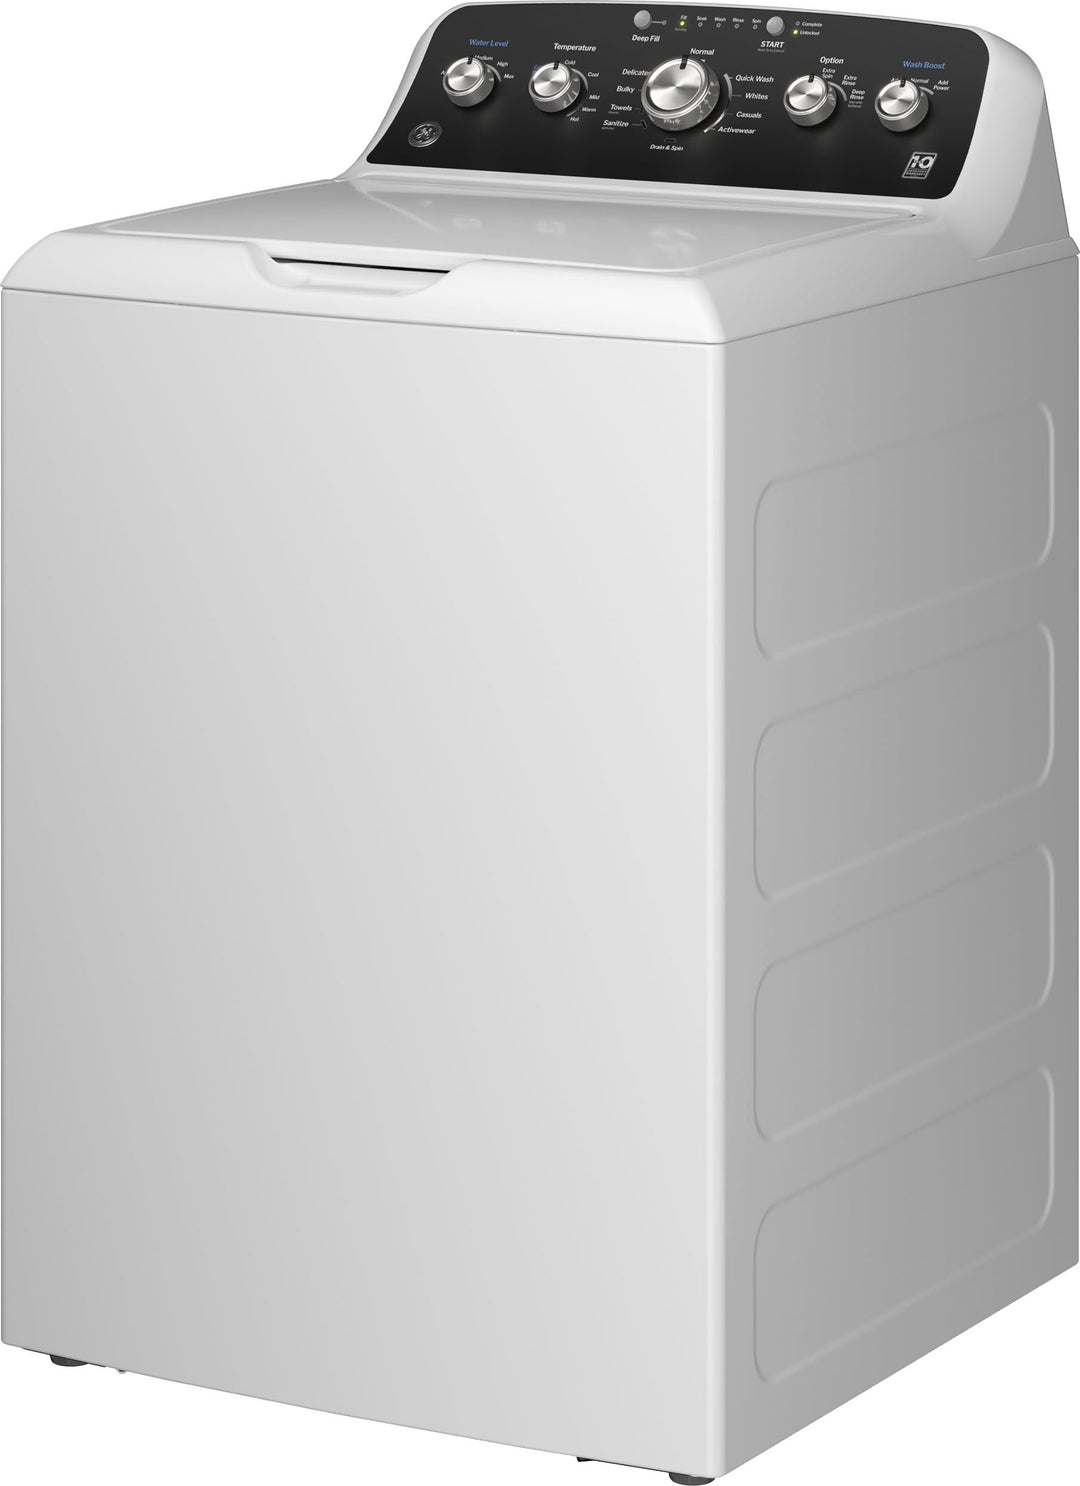 GE - 4.5 Cu. Ft. High-Efficiency Top Load Washer with Wash Boost - White_19